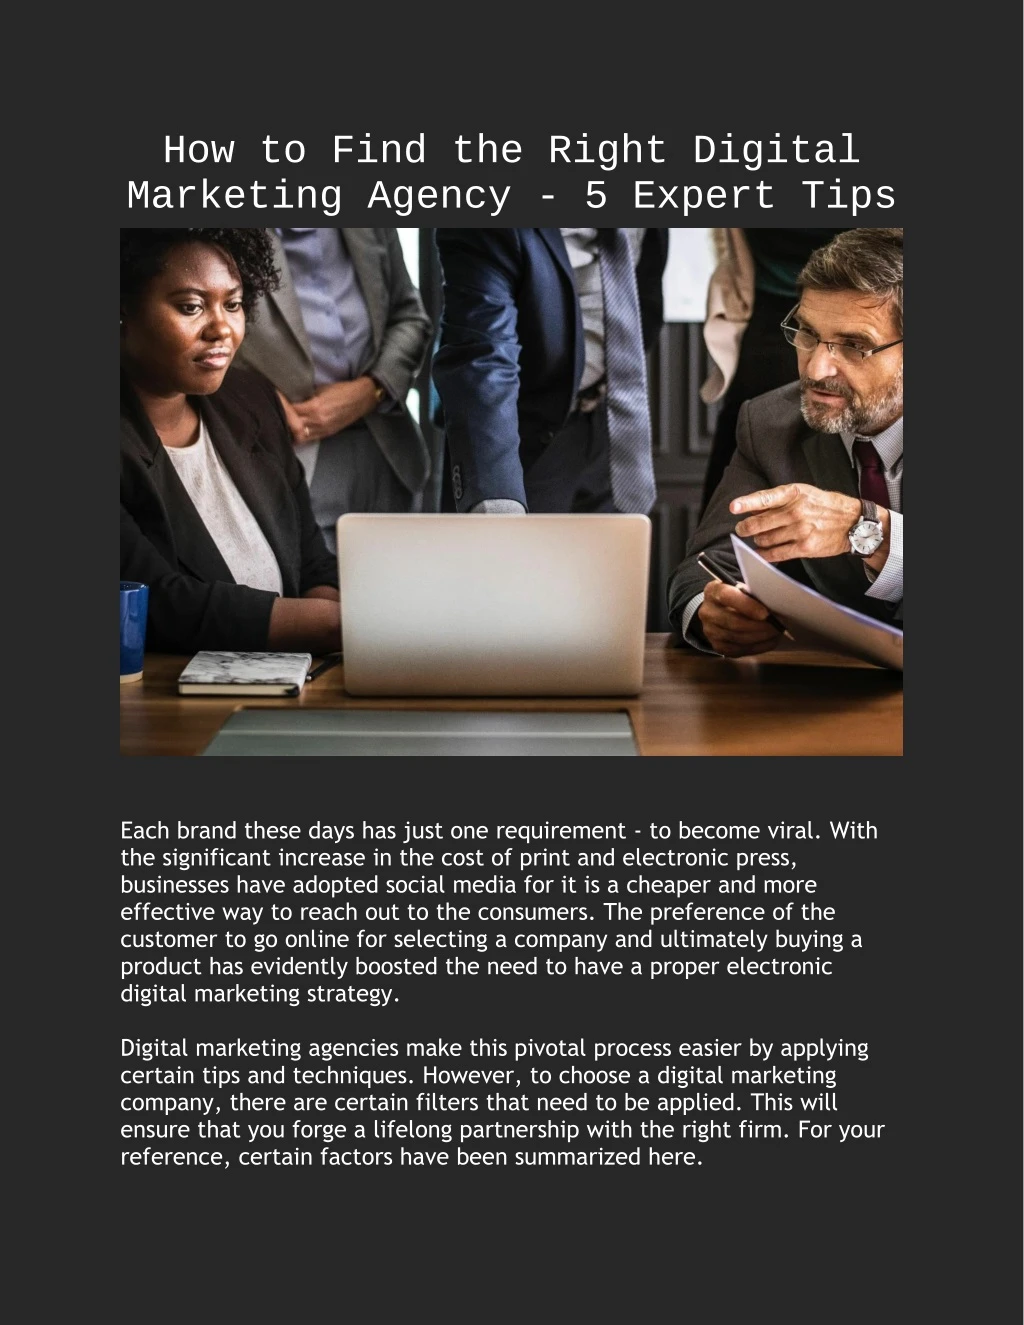 how to find the right digital marketing agency